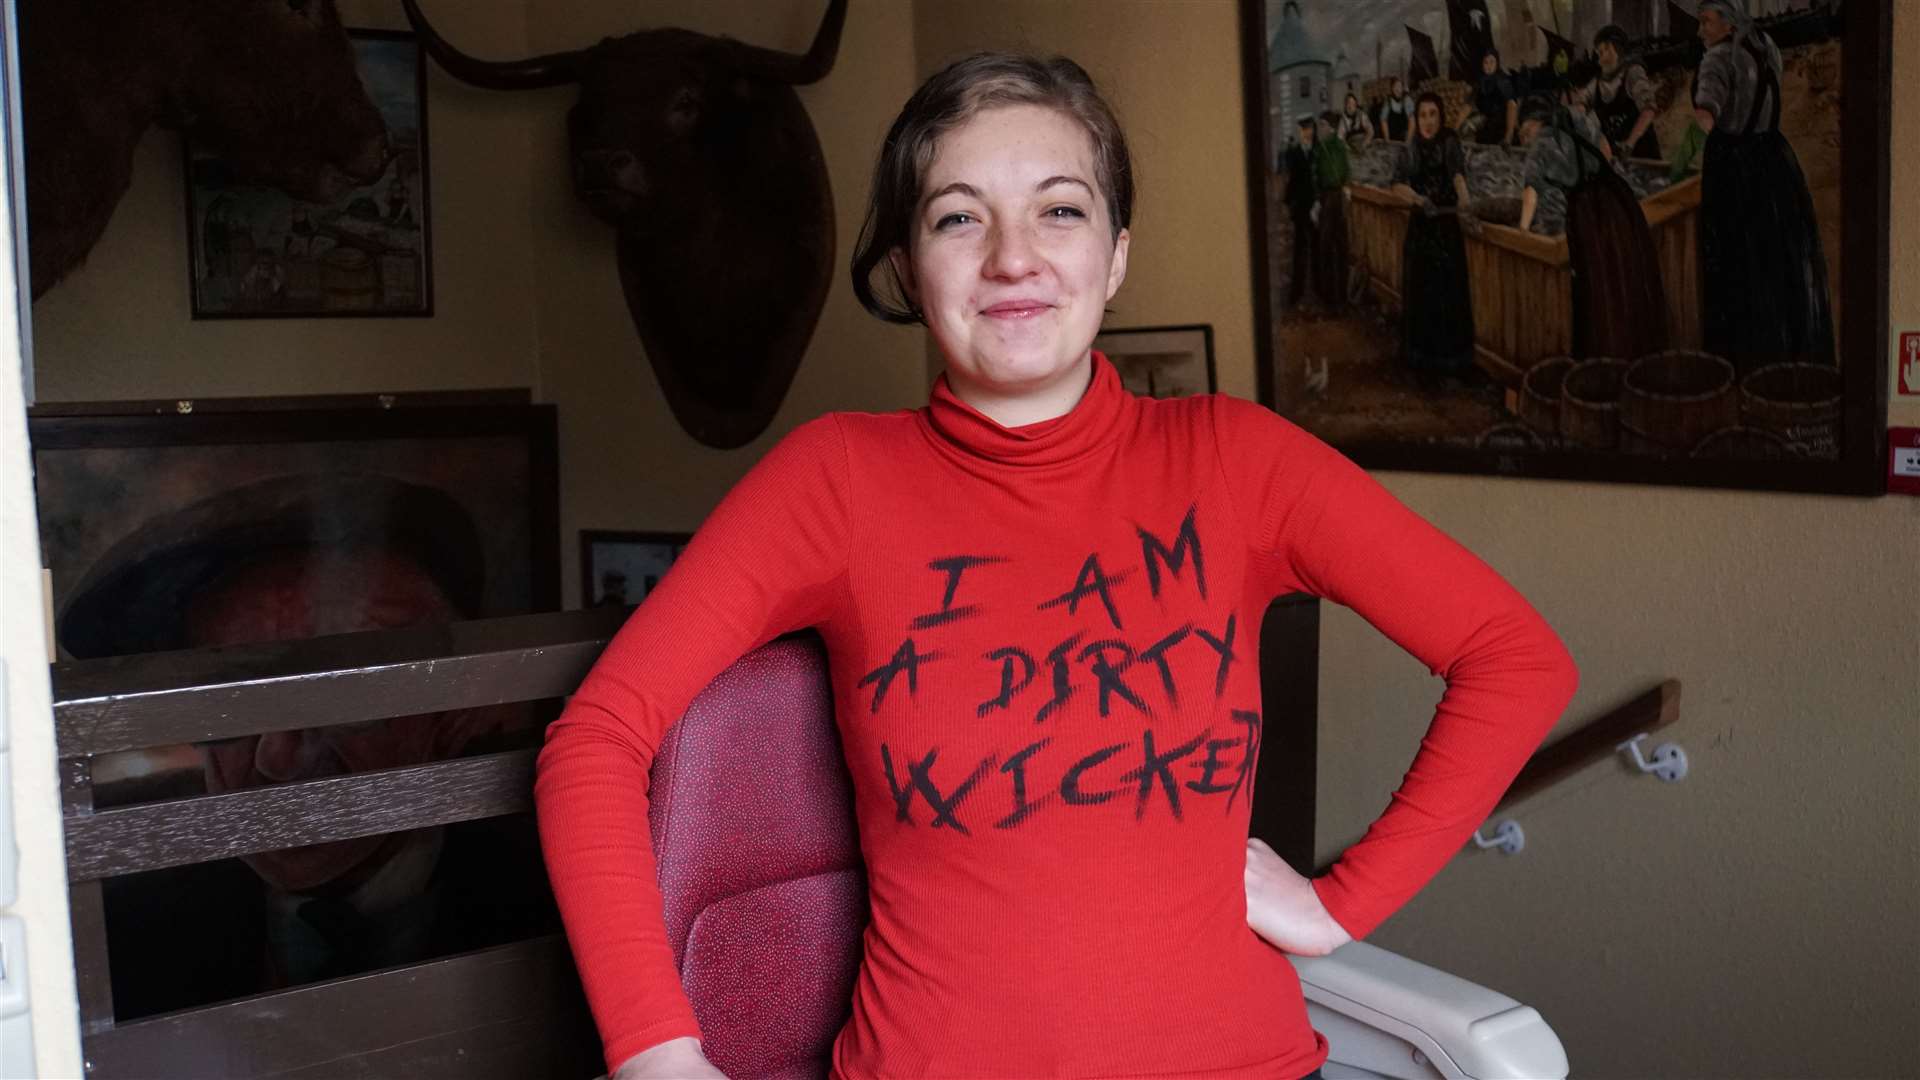 Anna wears her 'Dirty Wicker' shirt with pride. Picture: DGS